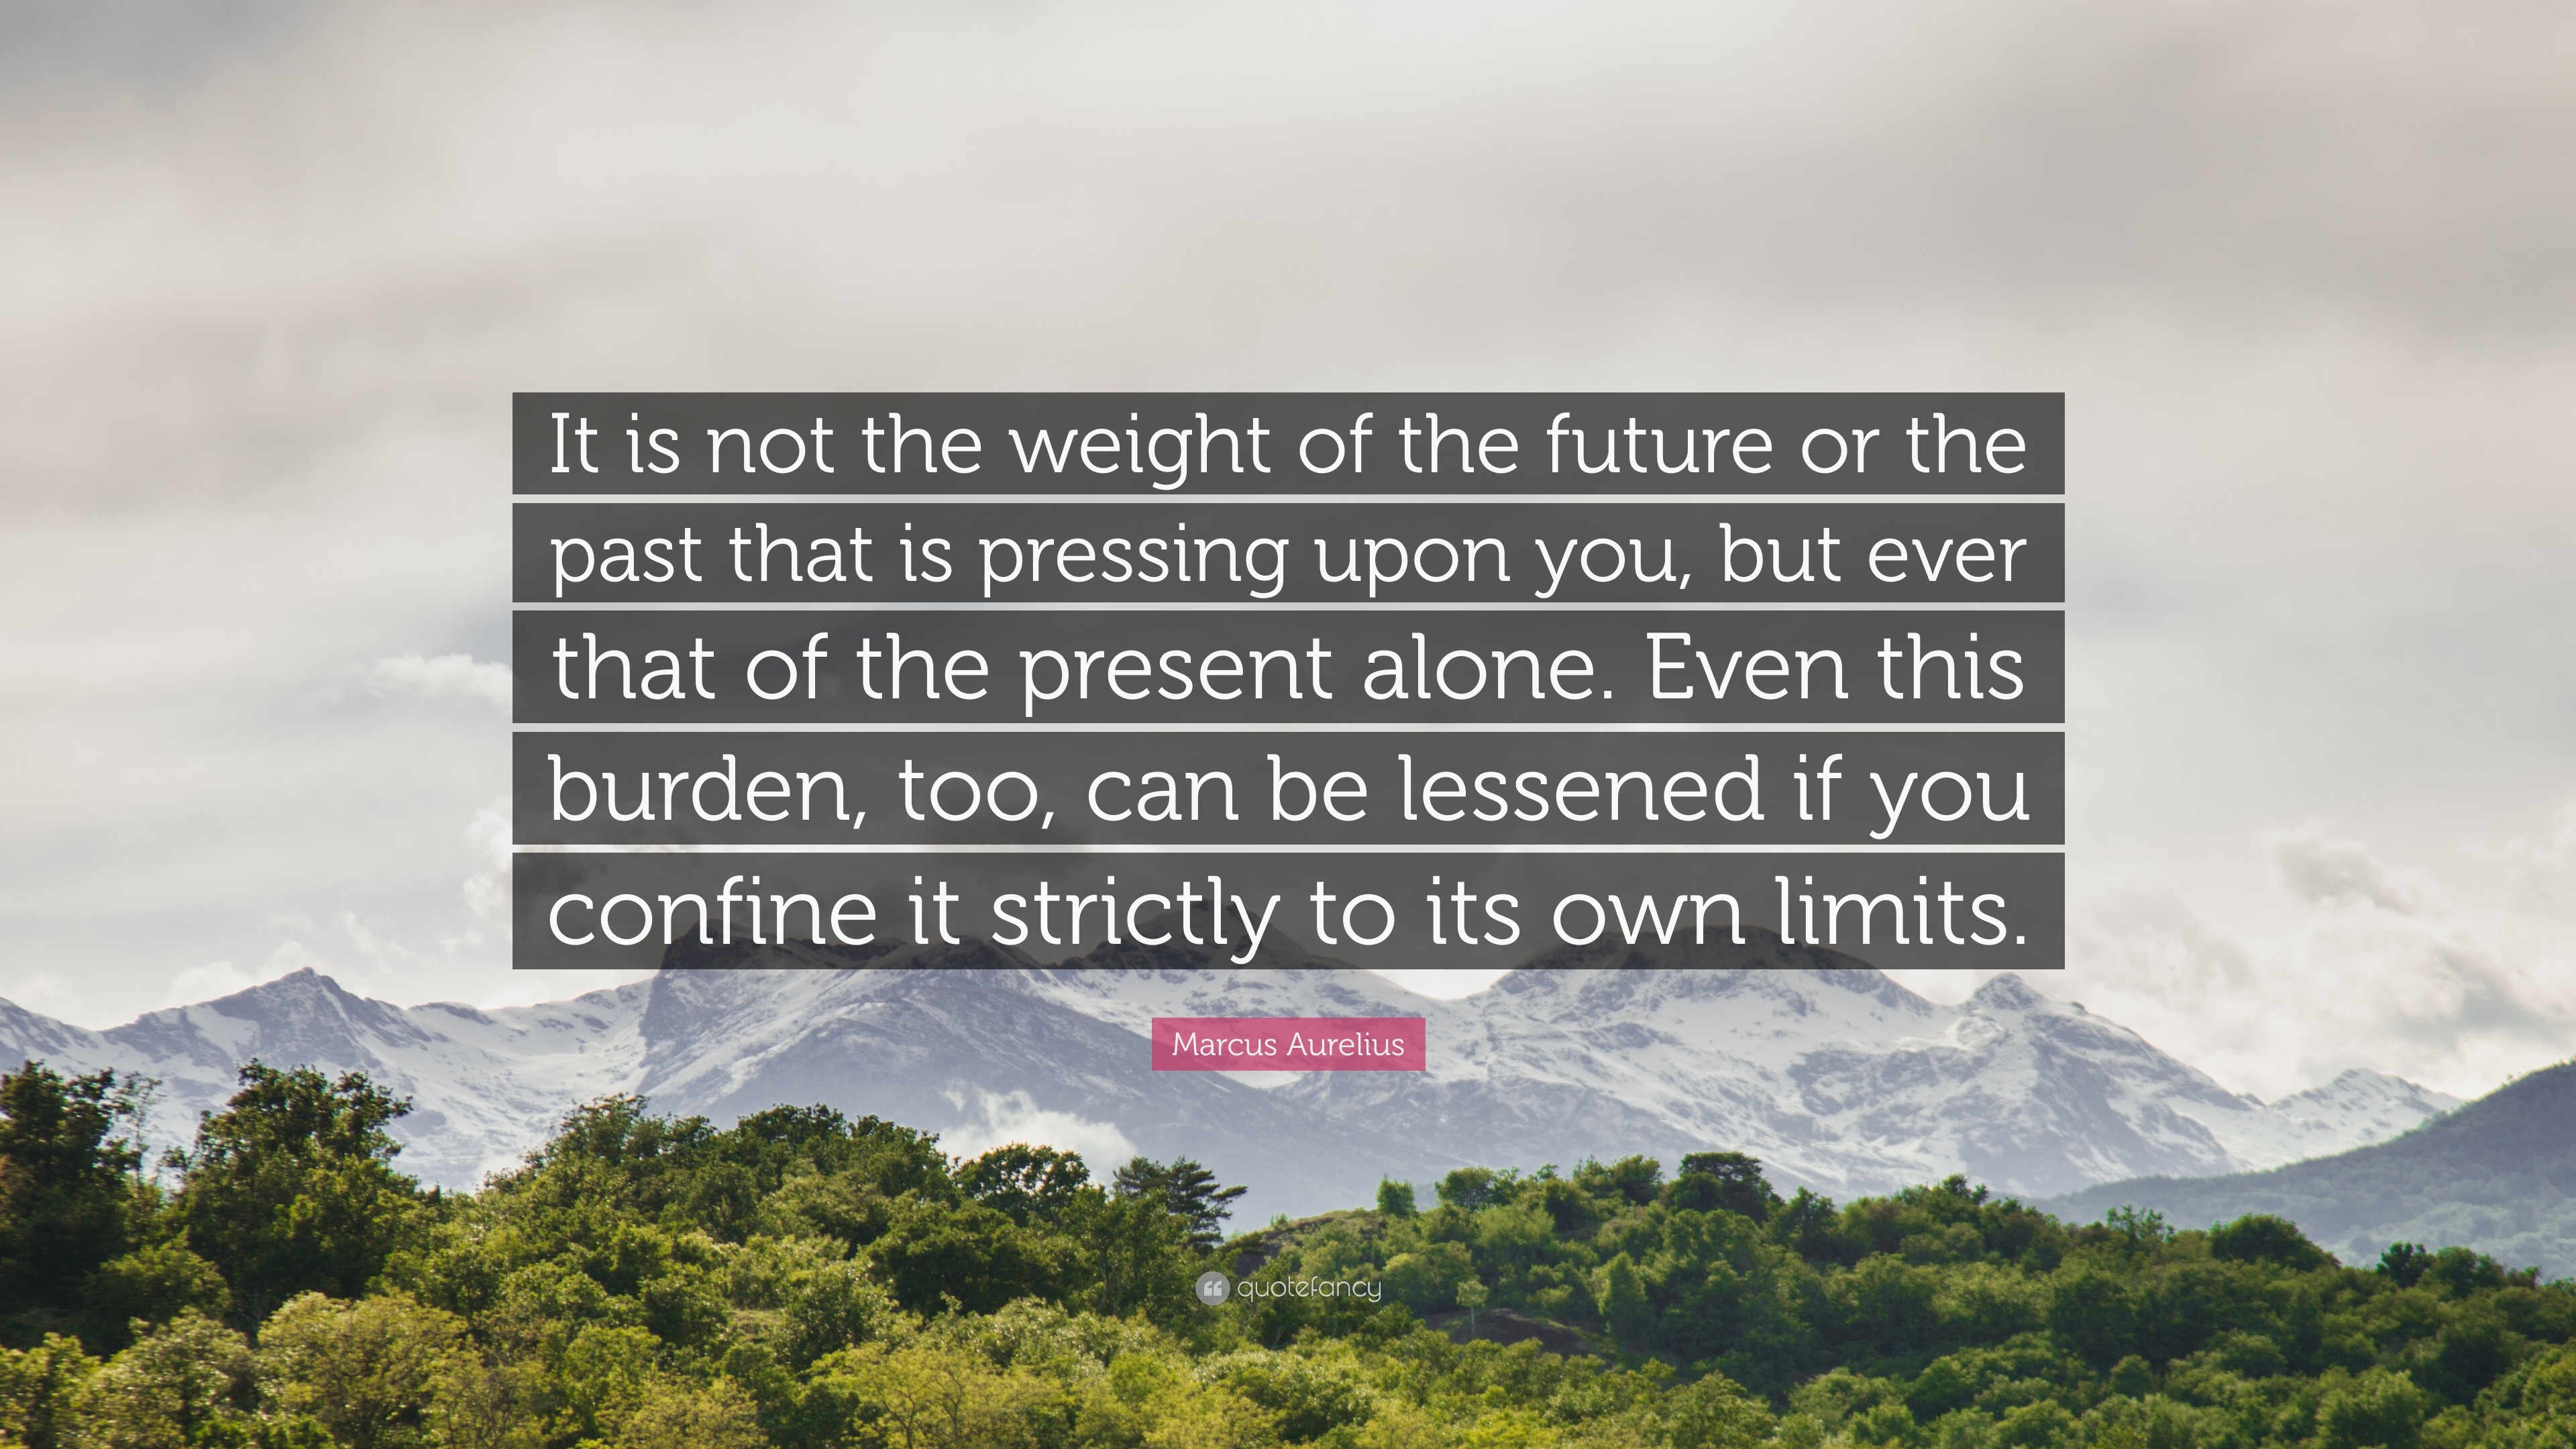 https://quotefancy.com/media/wallpaper/3840x2160/104511-Marcus-Aurelius-Quote-It-is-not-the-weight-of-the-future-or-the.jpg